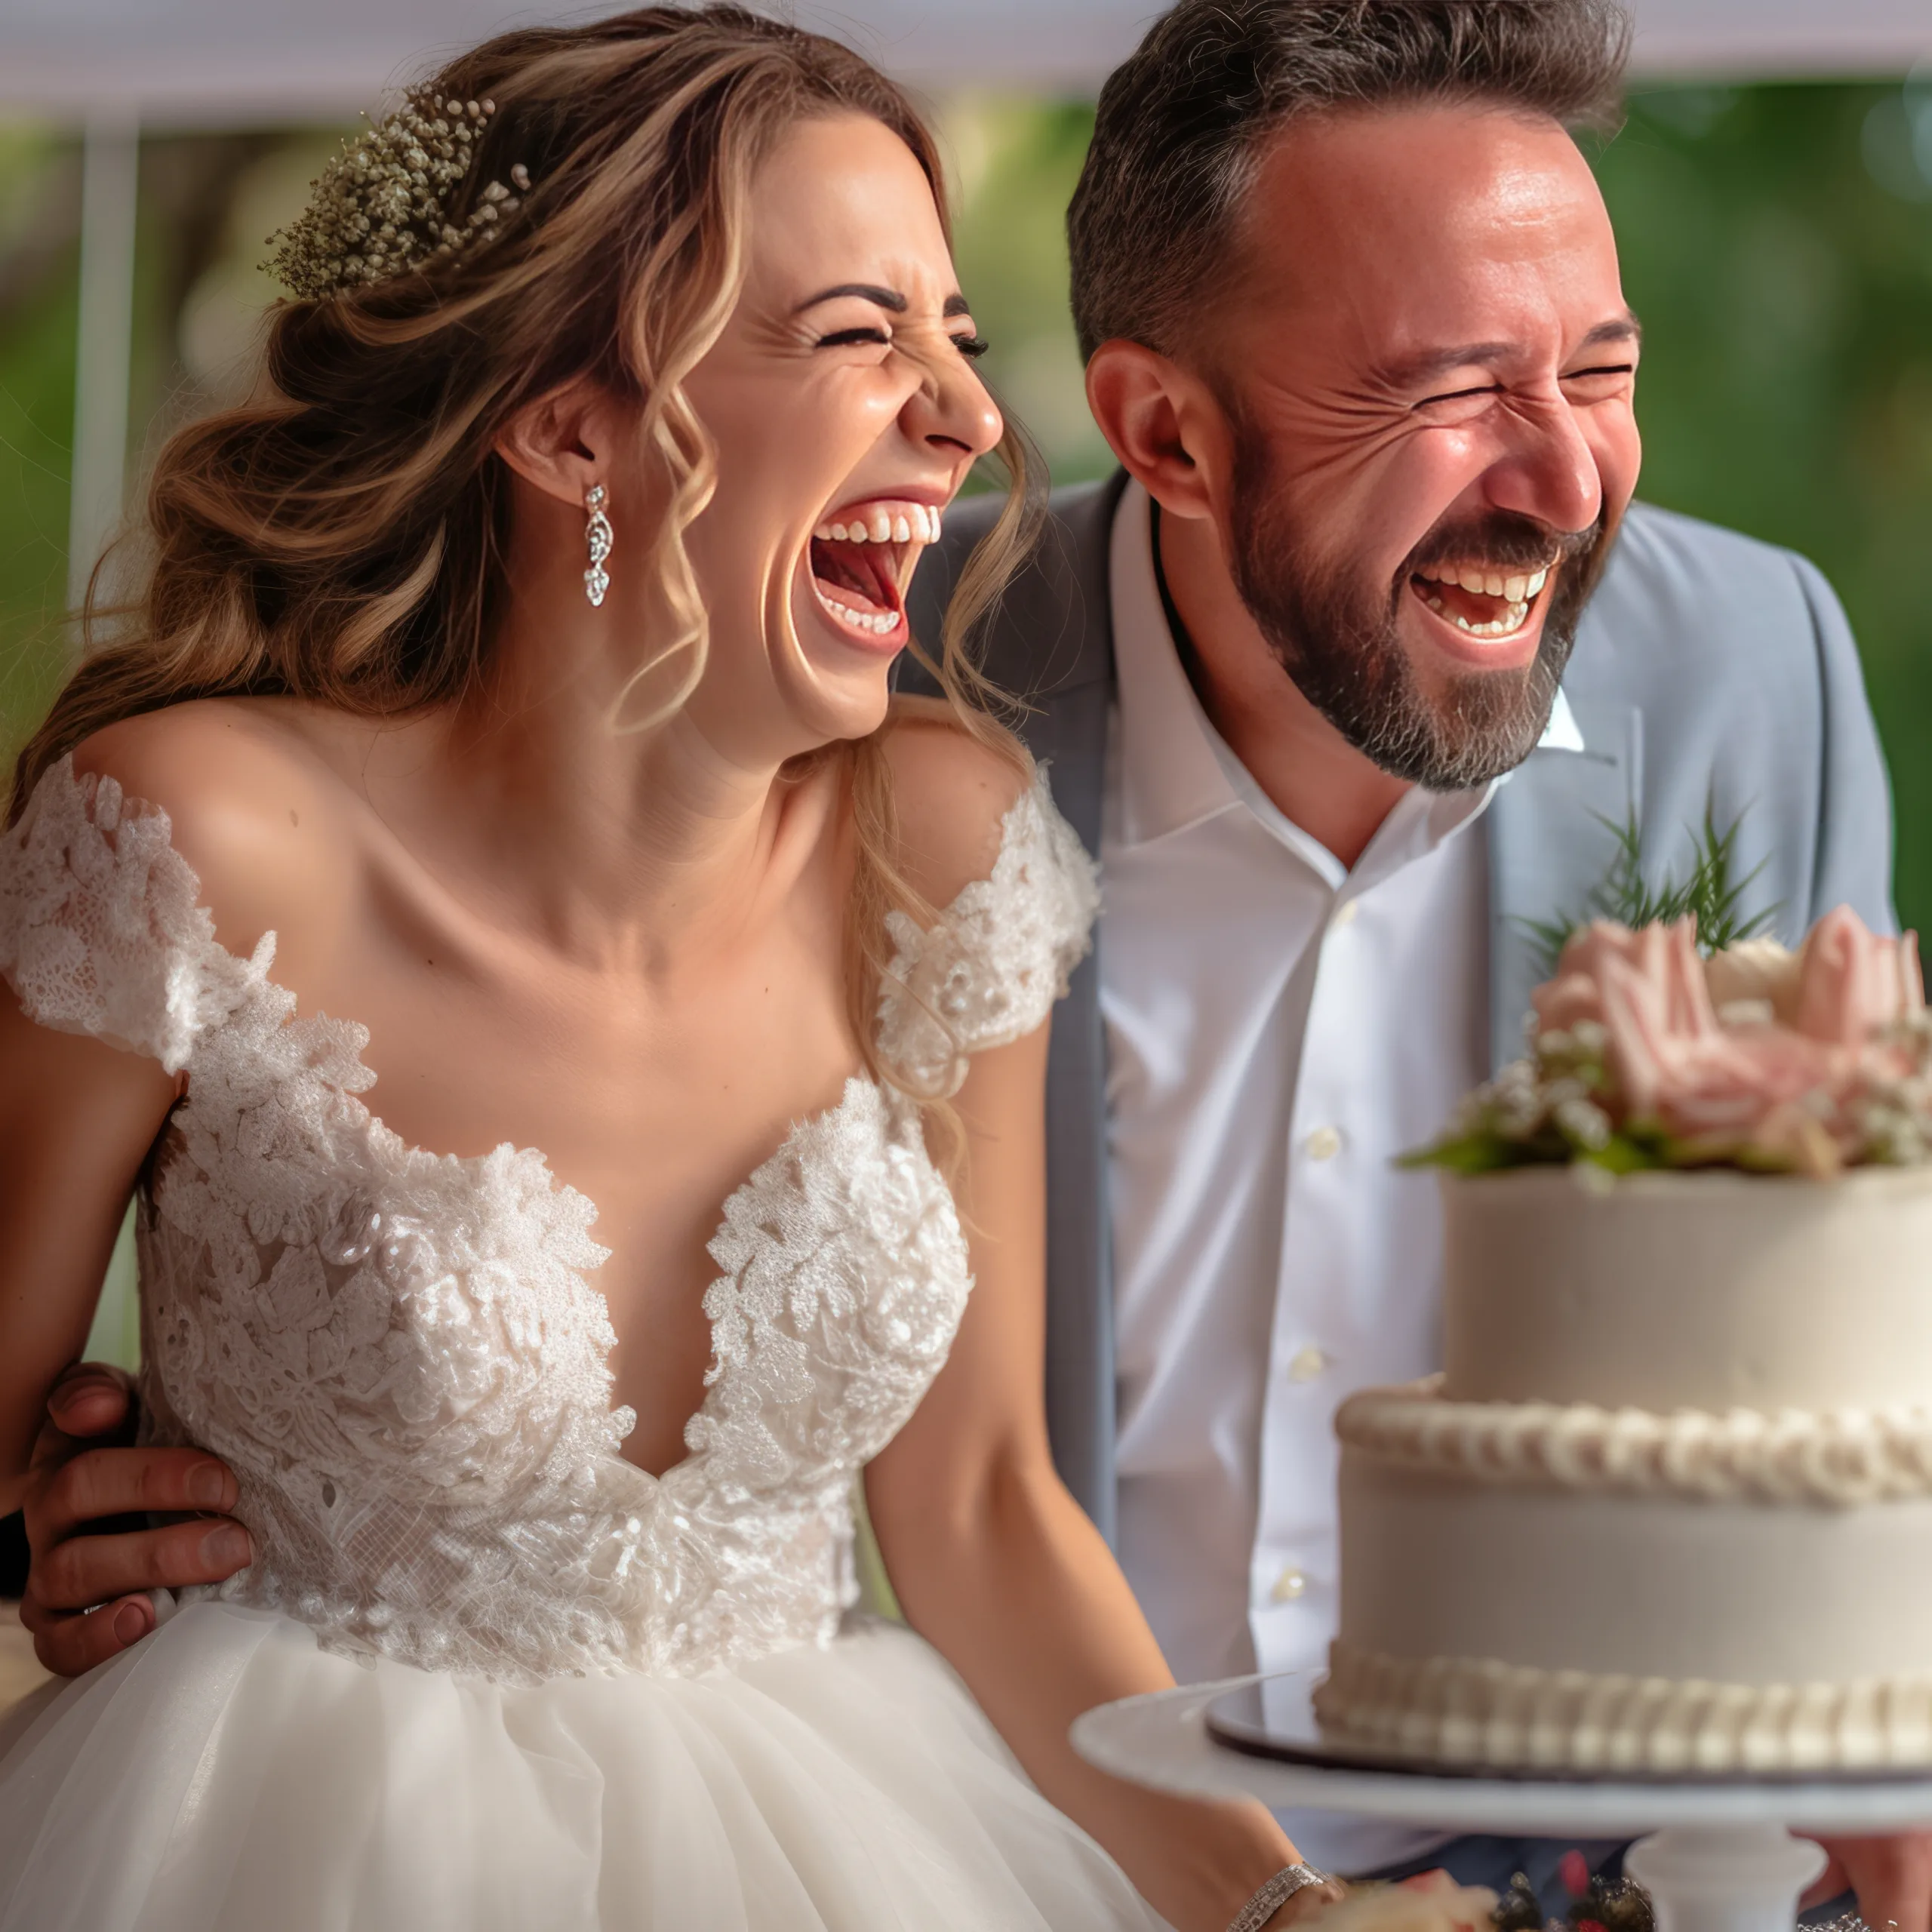 Candid Photographer: a bride and groom are laughing as they cut their wedding cake.